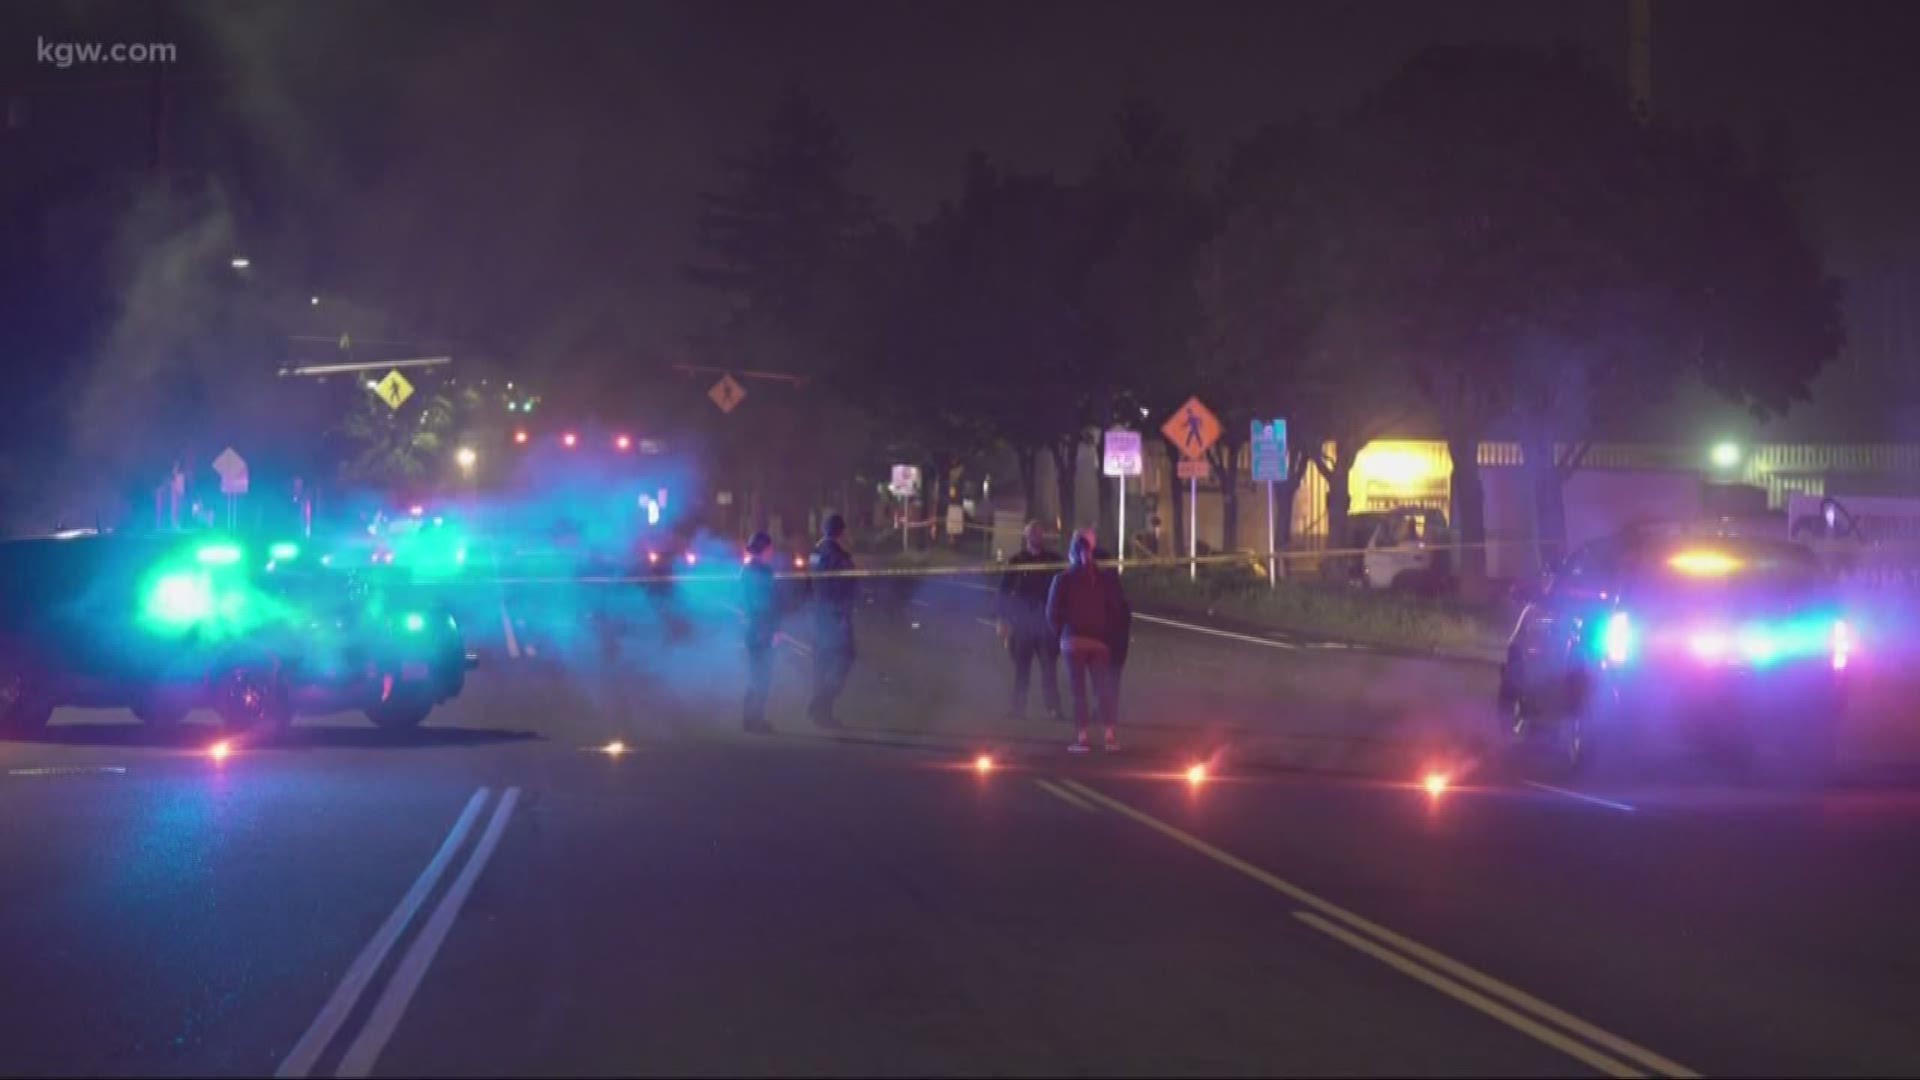 Gresham police identified 32-year-old John Summers and 47-year-old Mary Whitmore as the two shooting victims in an early Saturday morning shooting.